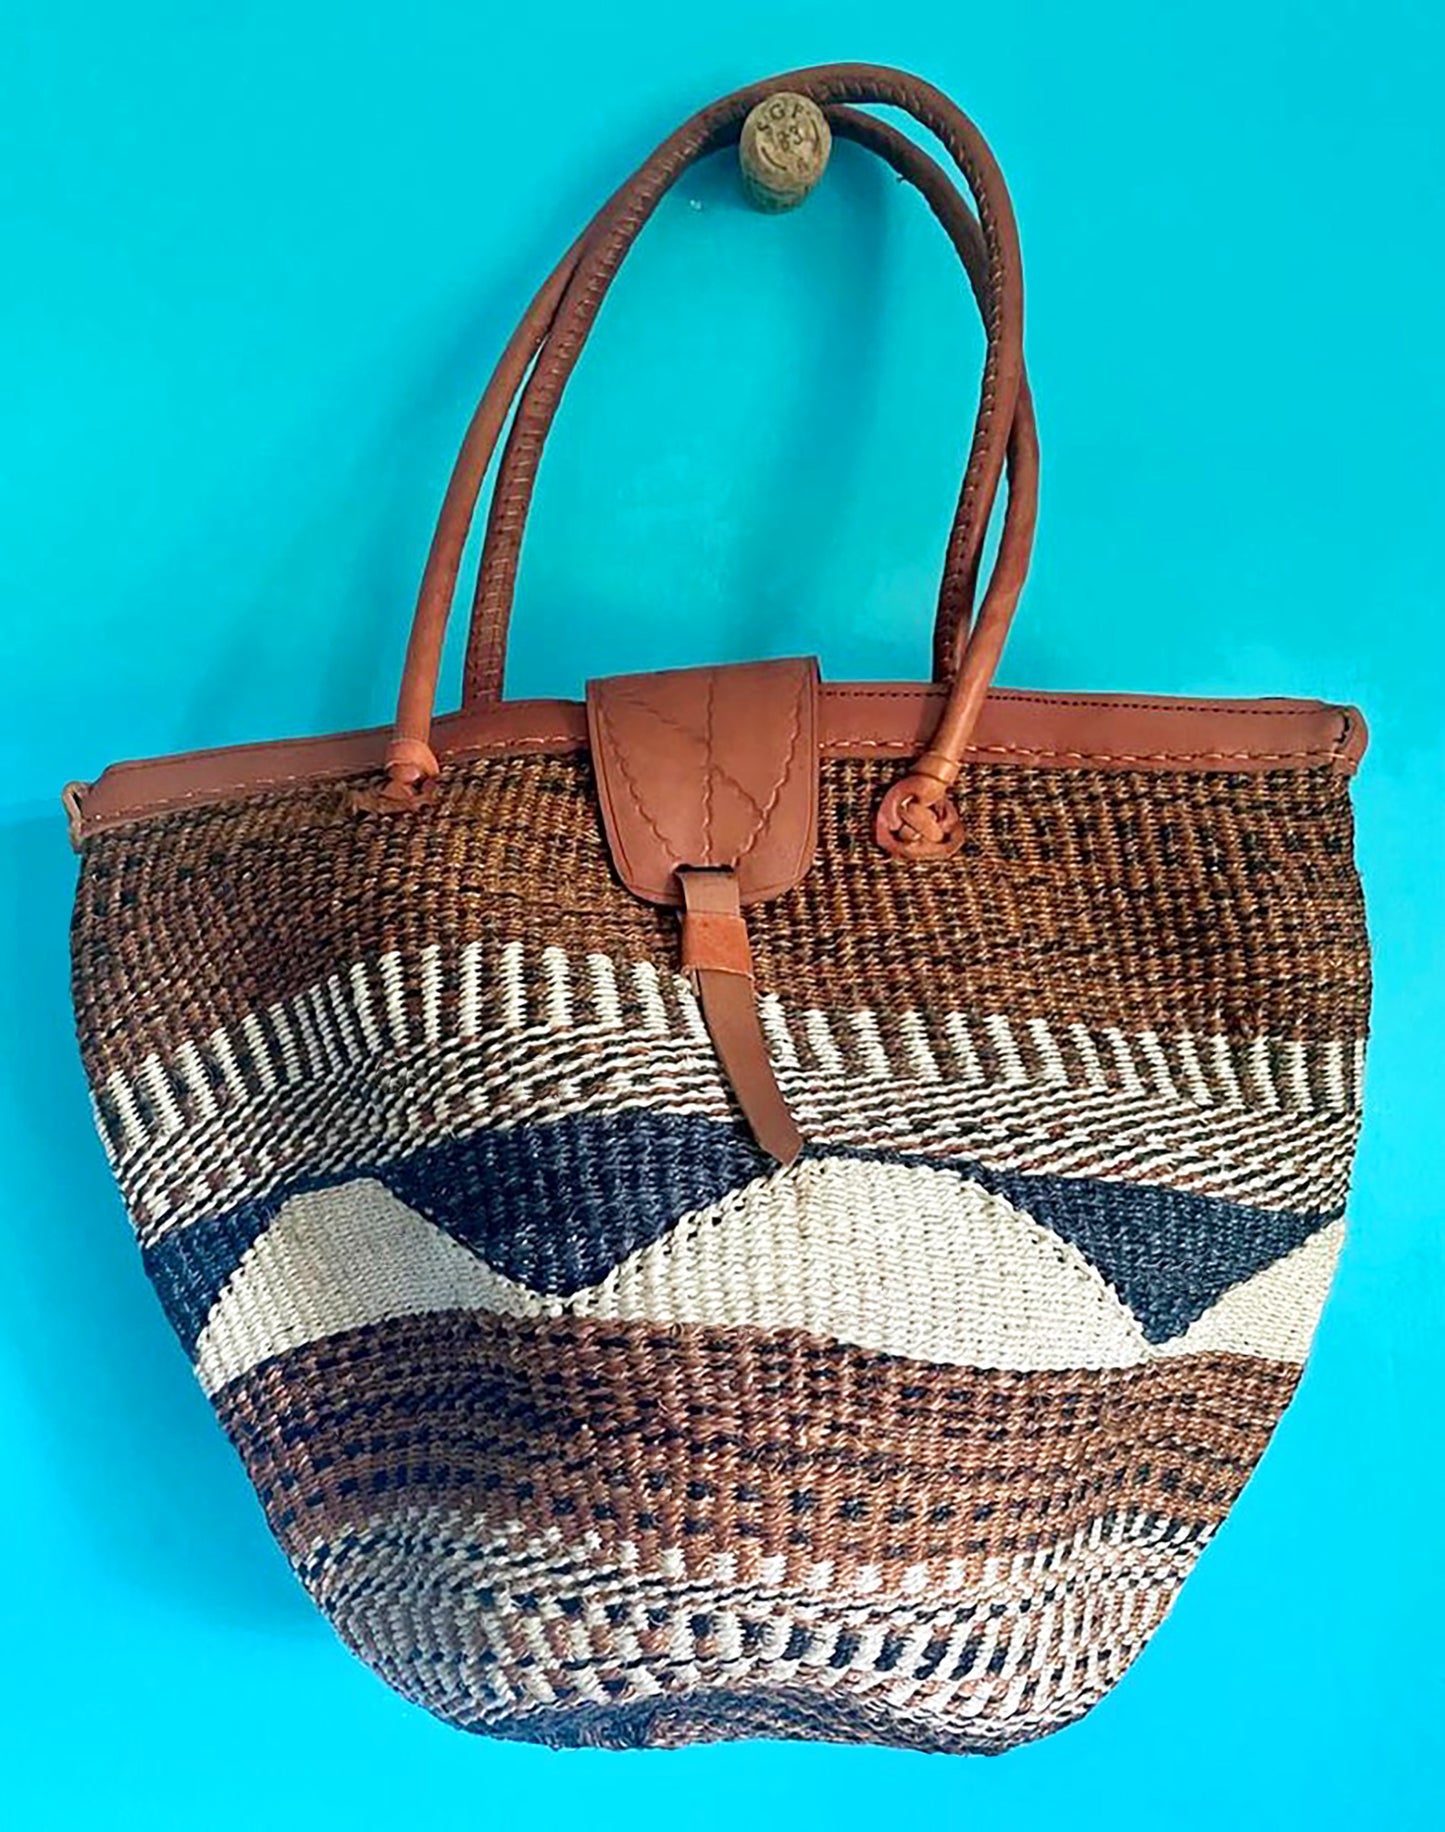 These hand woven sisal bags from Kenya are made by generations of women artisans, who have learned the art of weaving from their mothers and grandmothers. Sustainably sourced sisal fibre, natural dyes, and highest quality vegetable tanned leather, create a beautiful blend of Kenyan culture and artistry. Each bag has it's authentic, one-of-a-kind style, and is the perfect accessory for the summer. Dimensions: 17w x 14h Made in Kenya